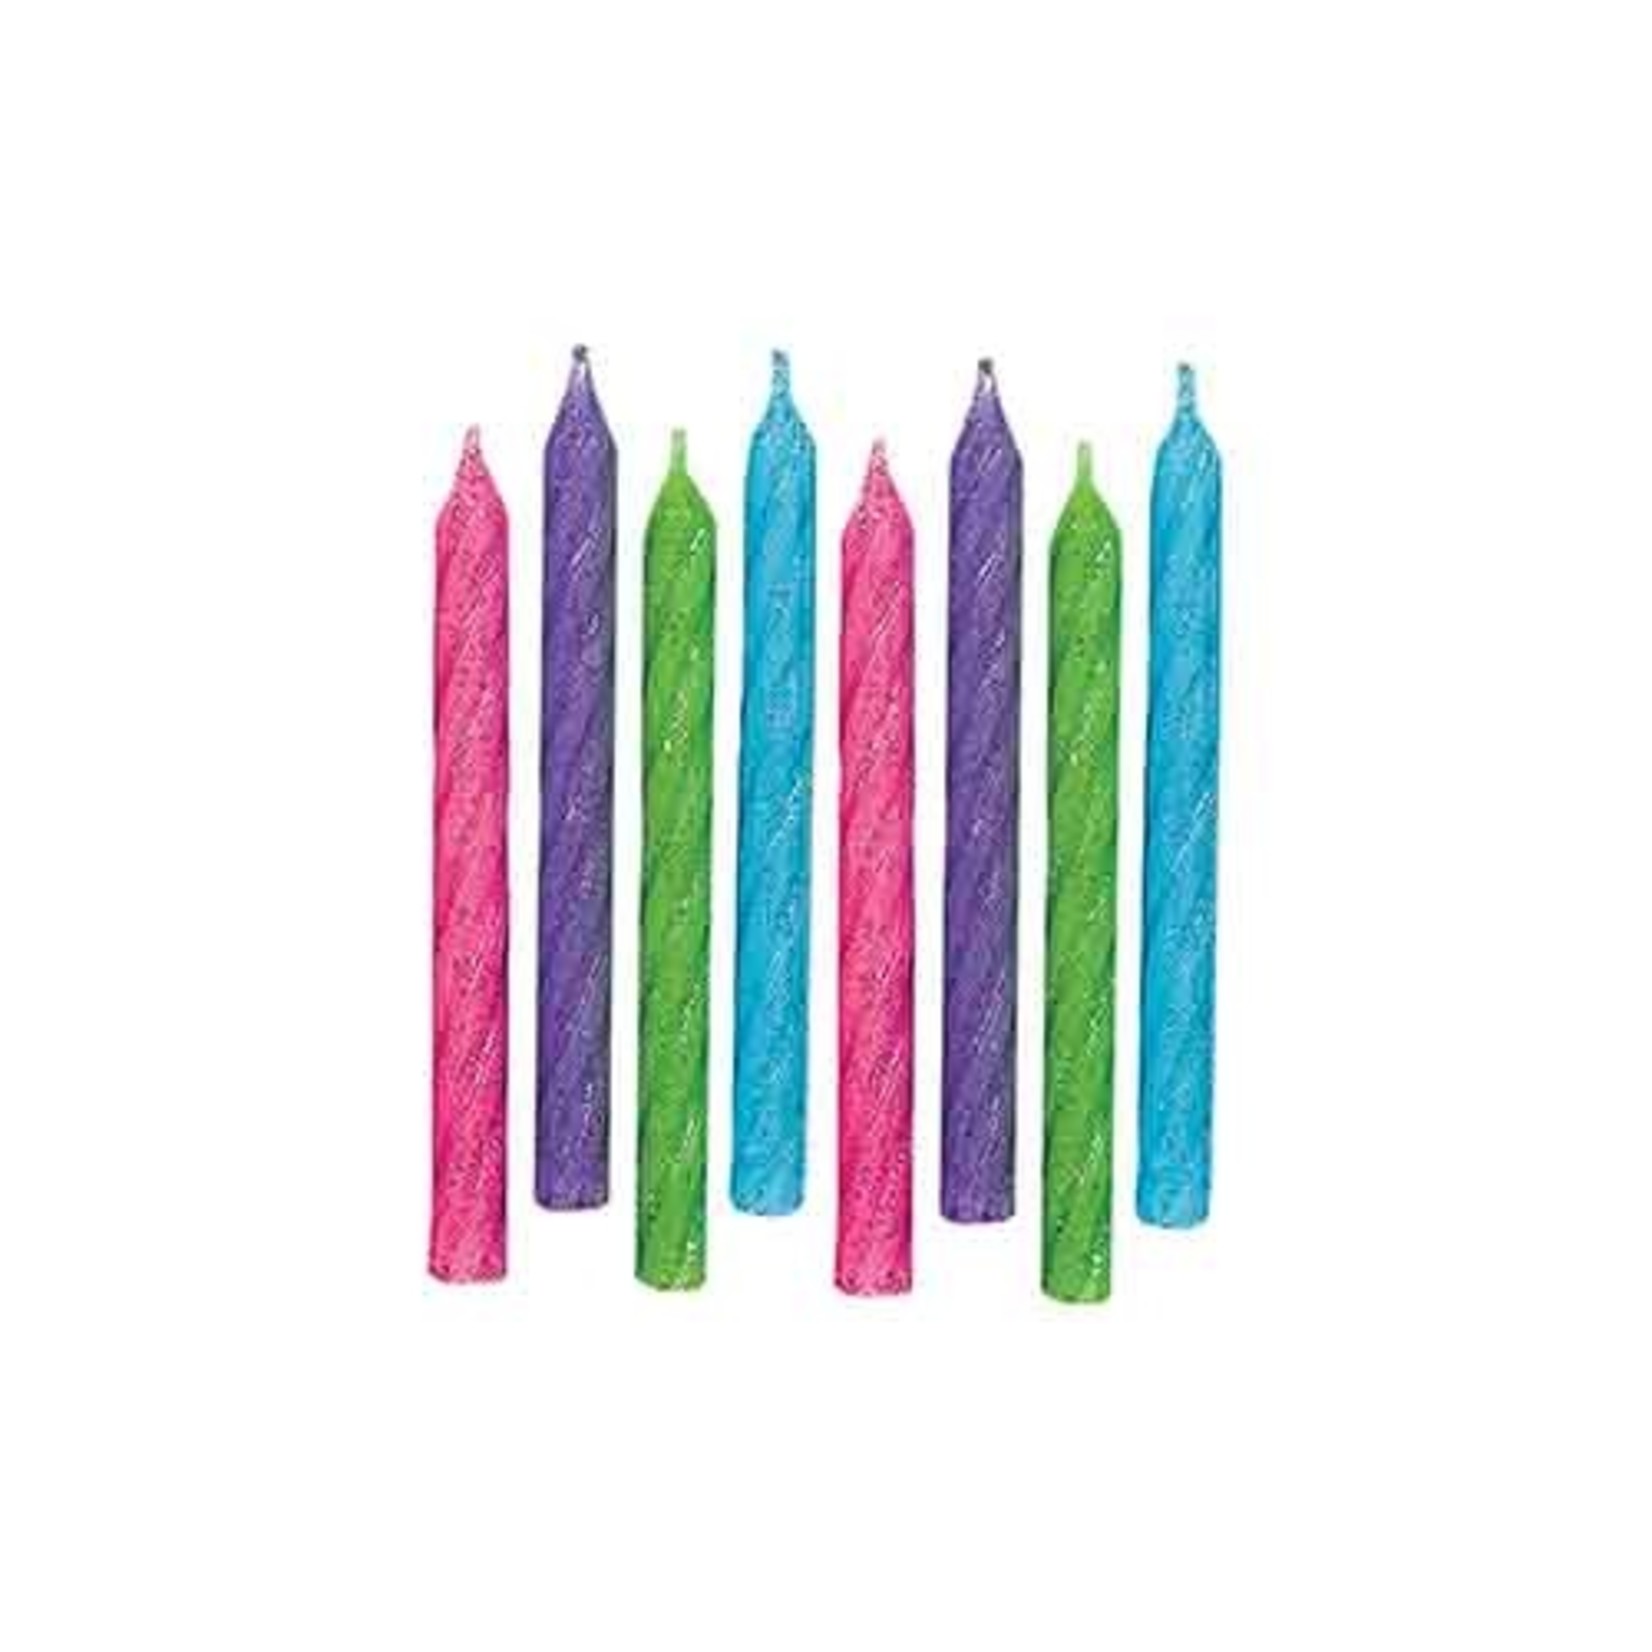 Amscan Large Bright Glitter Birthday Candles - 24ct.